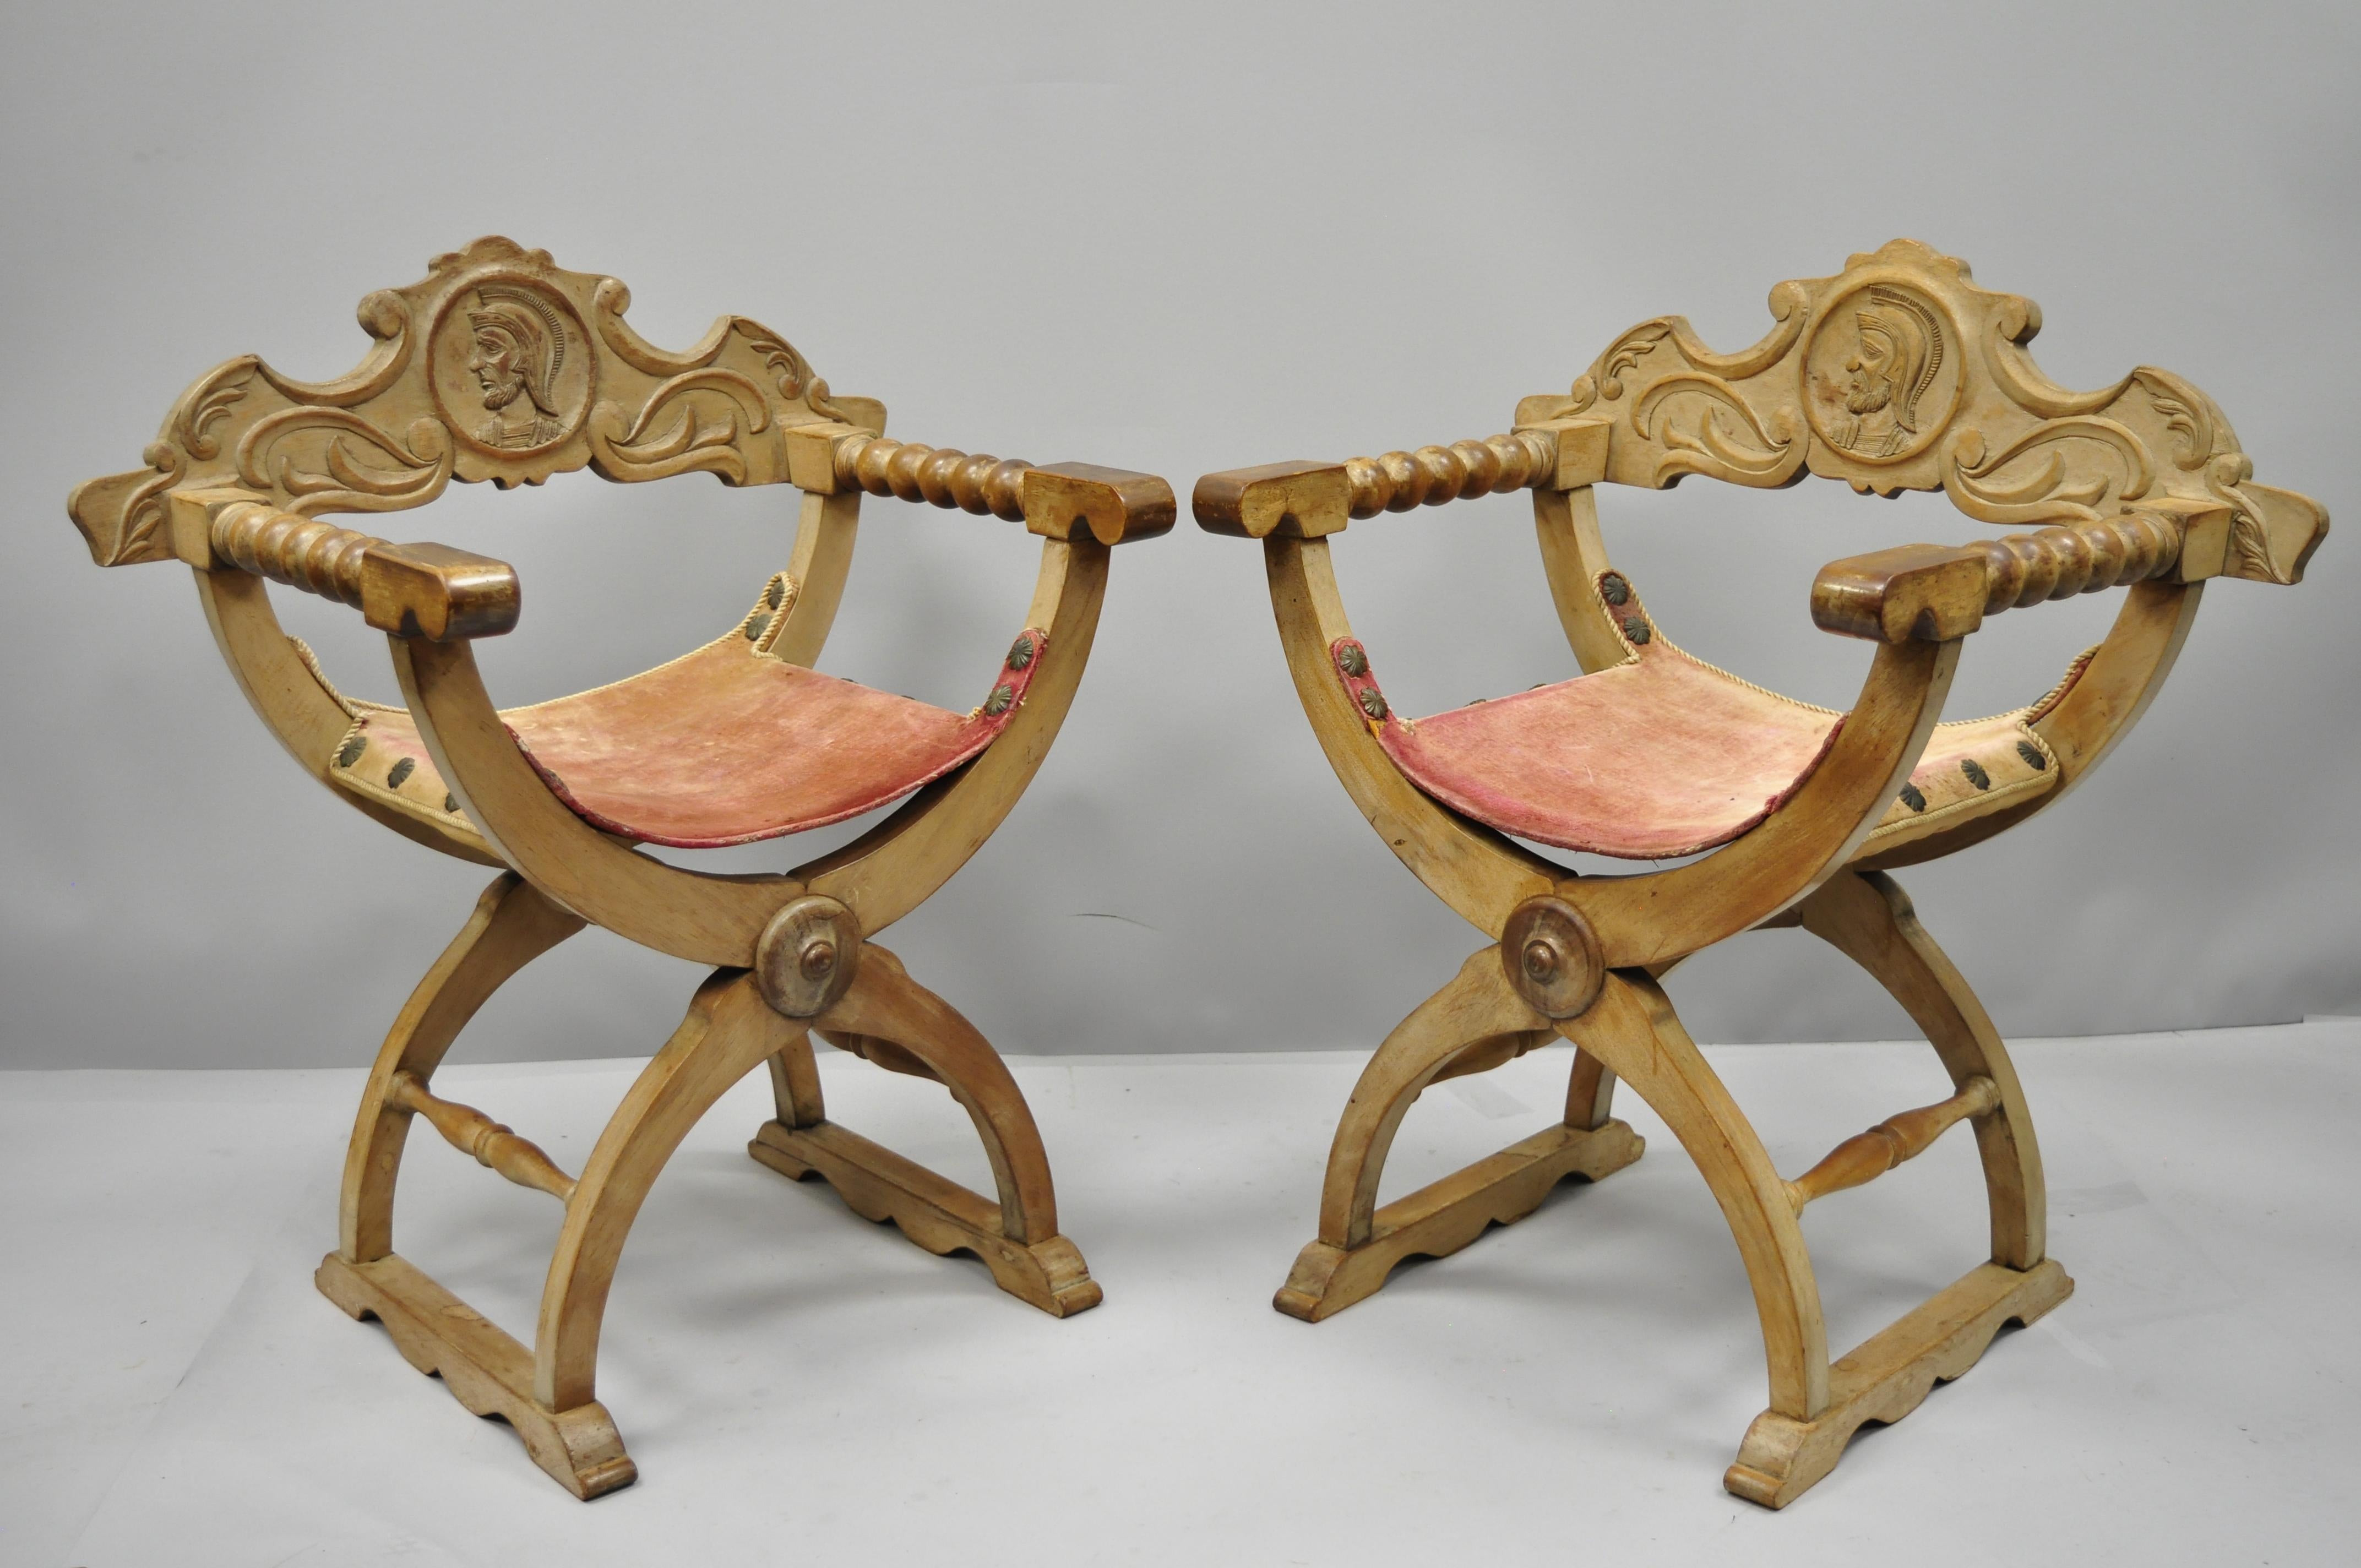 A pair of antique Spanish Renaissance curule Savonarola throne chairs. Item features lift out back, solid wood construction, pink velvet upholstered seat, and nicely carved details, circa late 19th-early 20th century. Measurements: 32